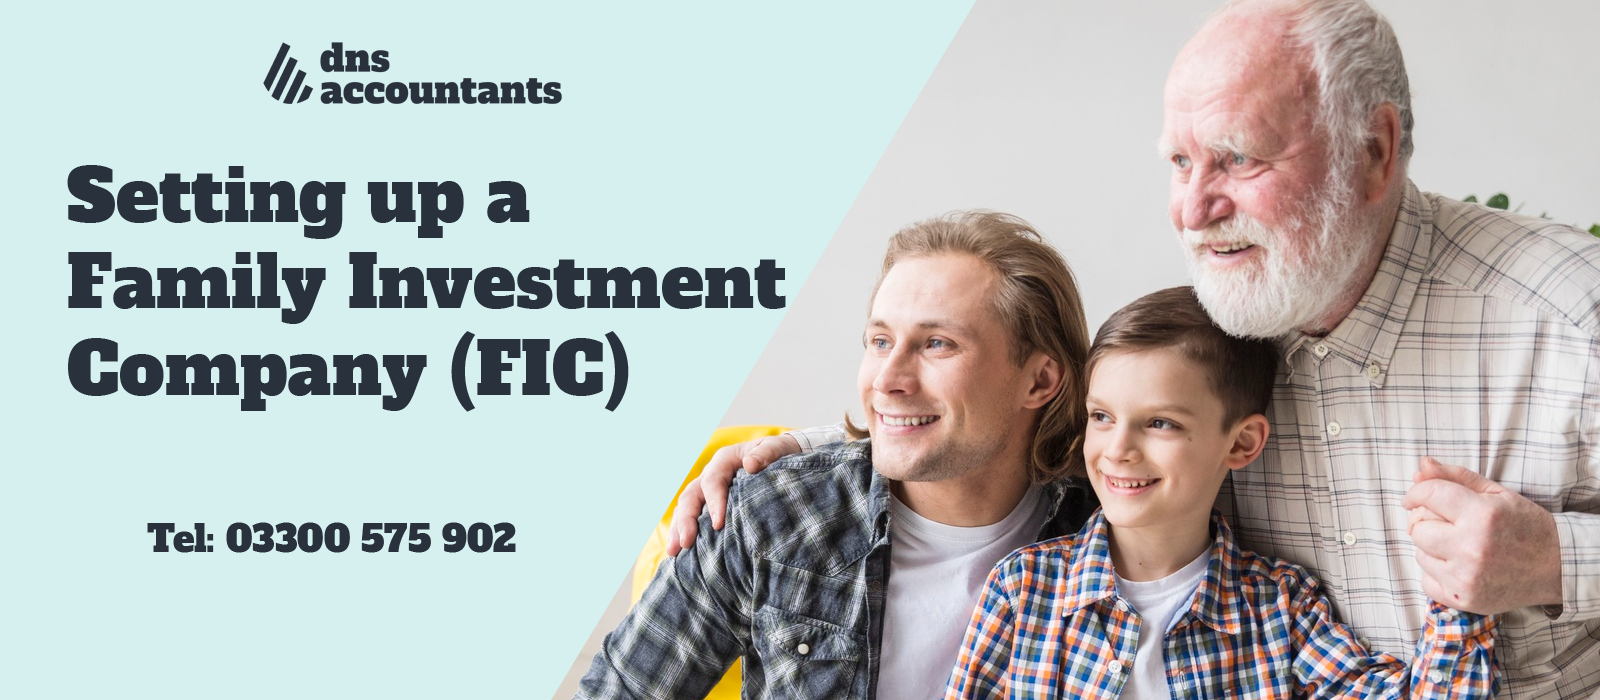 What is a Family Investment Company (FIC)? Setting up a Family Investment Company